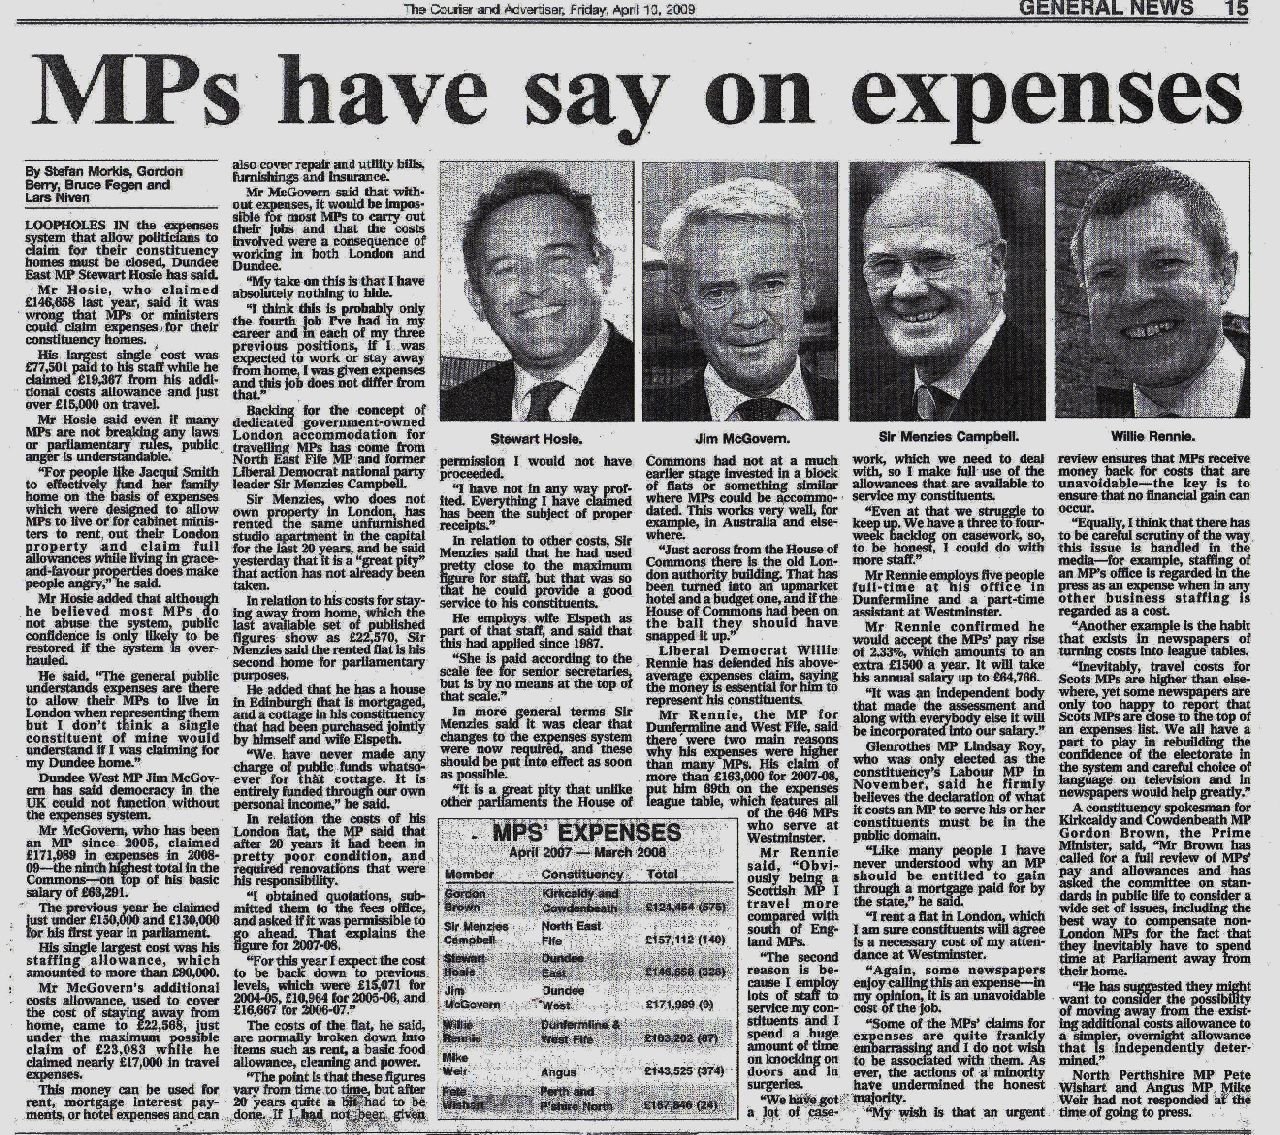 MPs have say on expenses